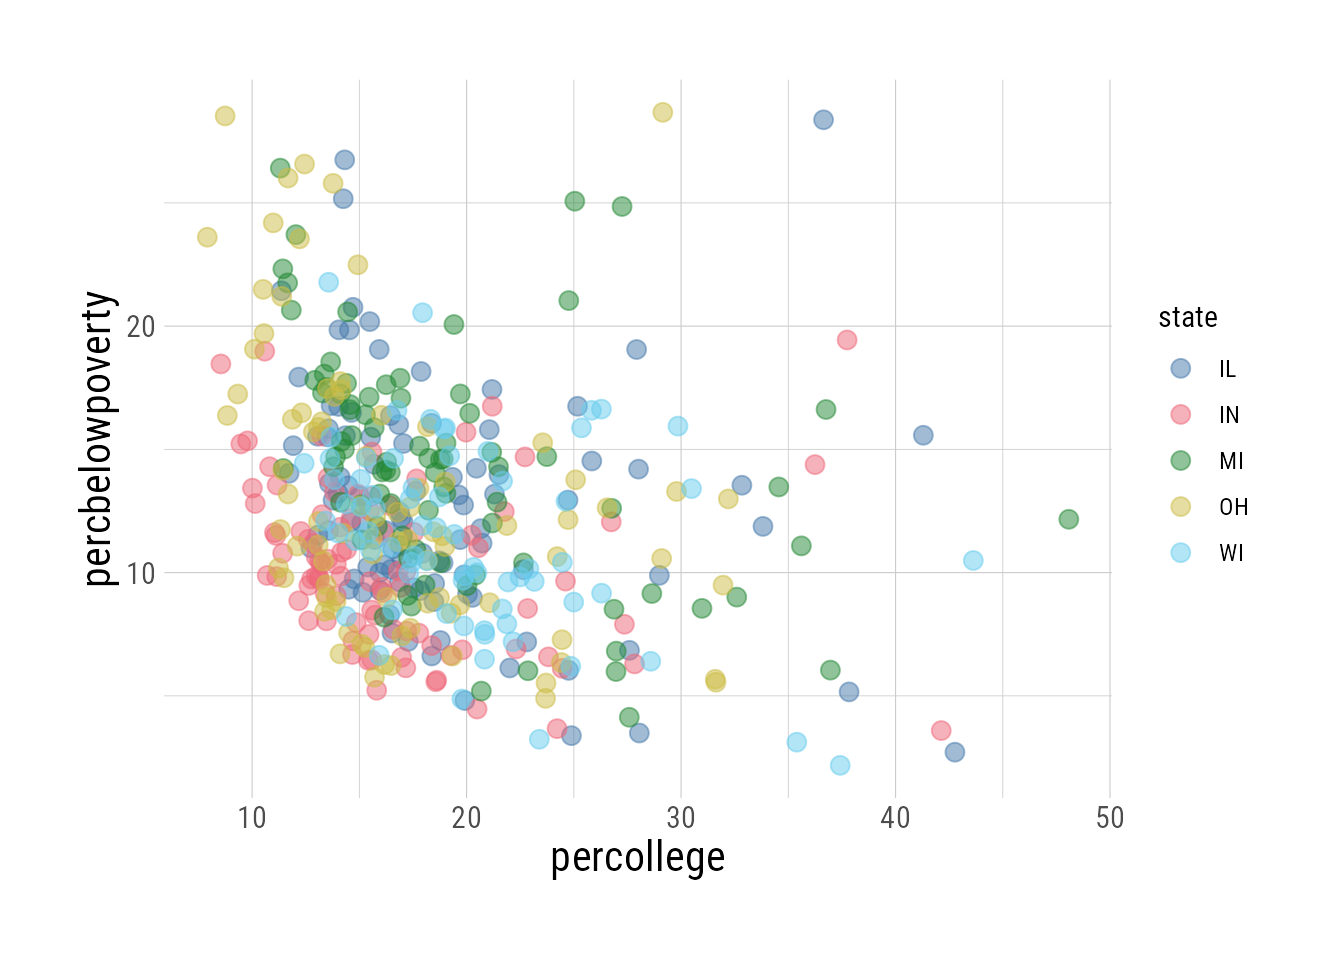 Percent of population with a college degree vs. percent of population below the poverty line, by state.  Data from `ggplot2::midwest`